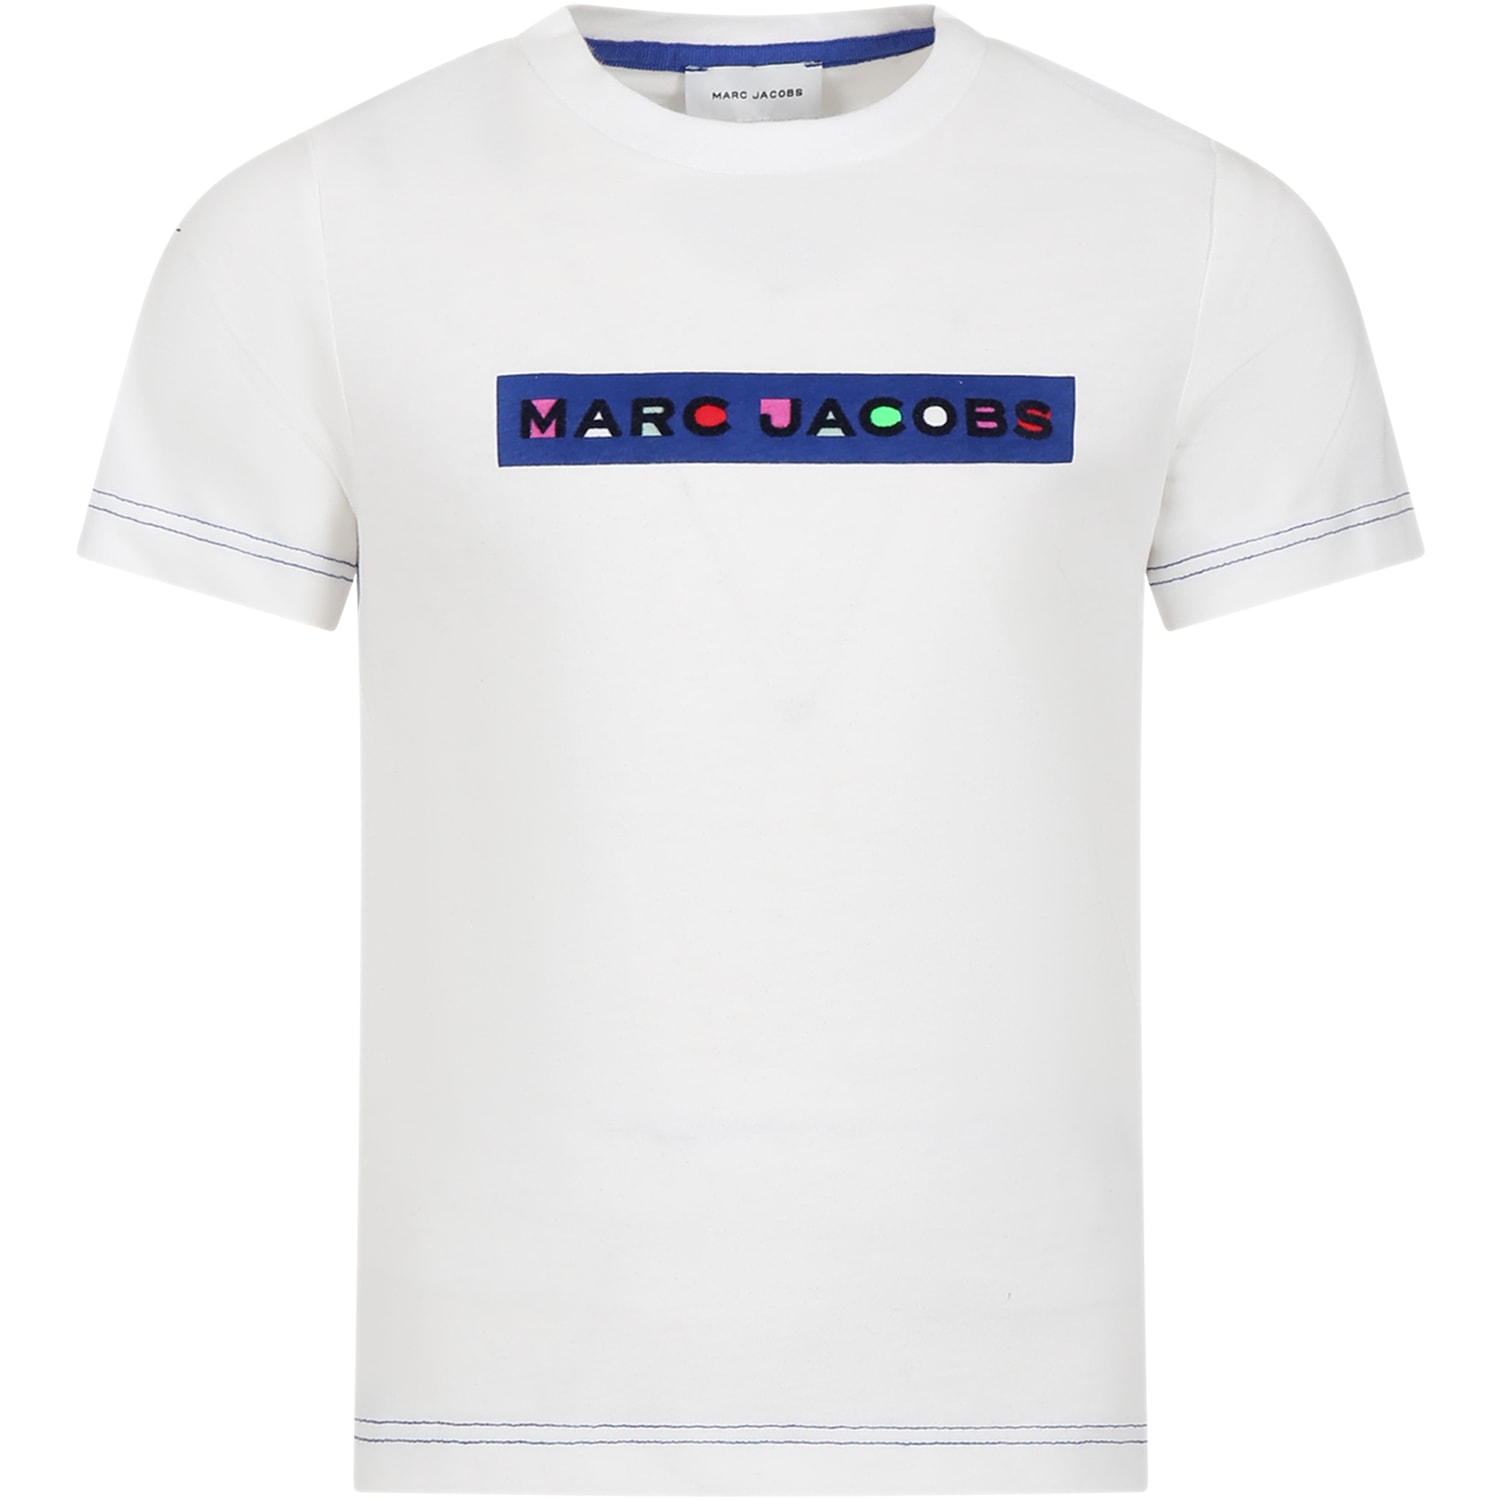 LITTLE MARC JACOBS WHITE T-SHIRT FOR KIDS WITH LOGO